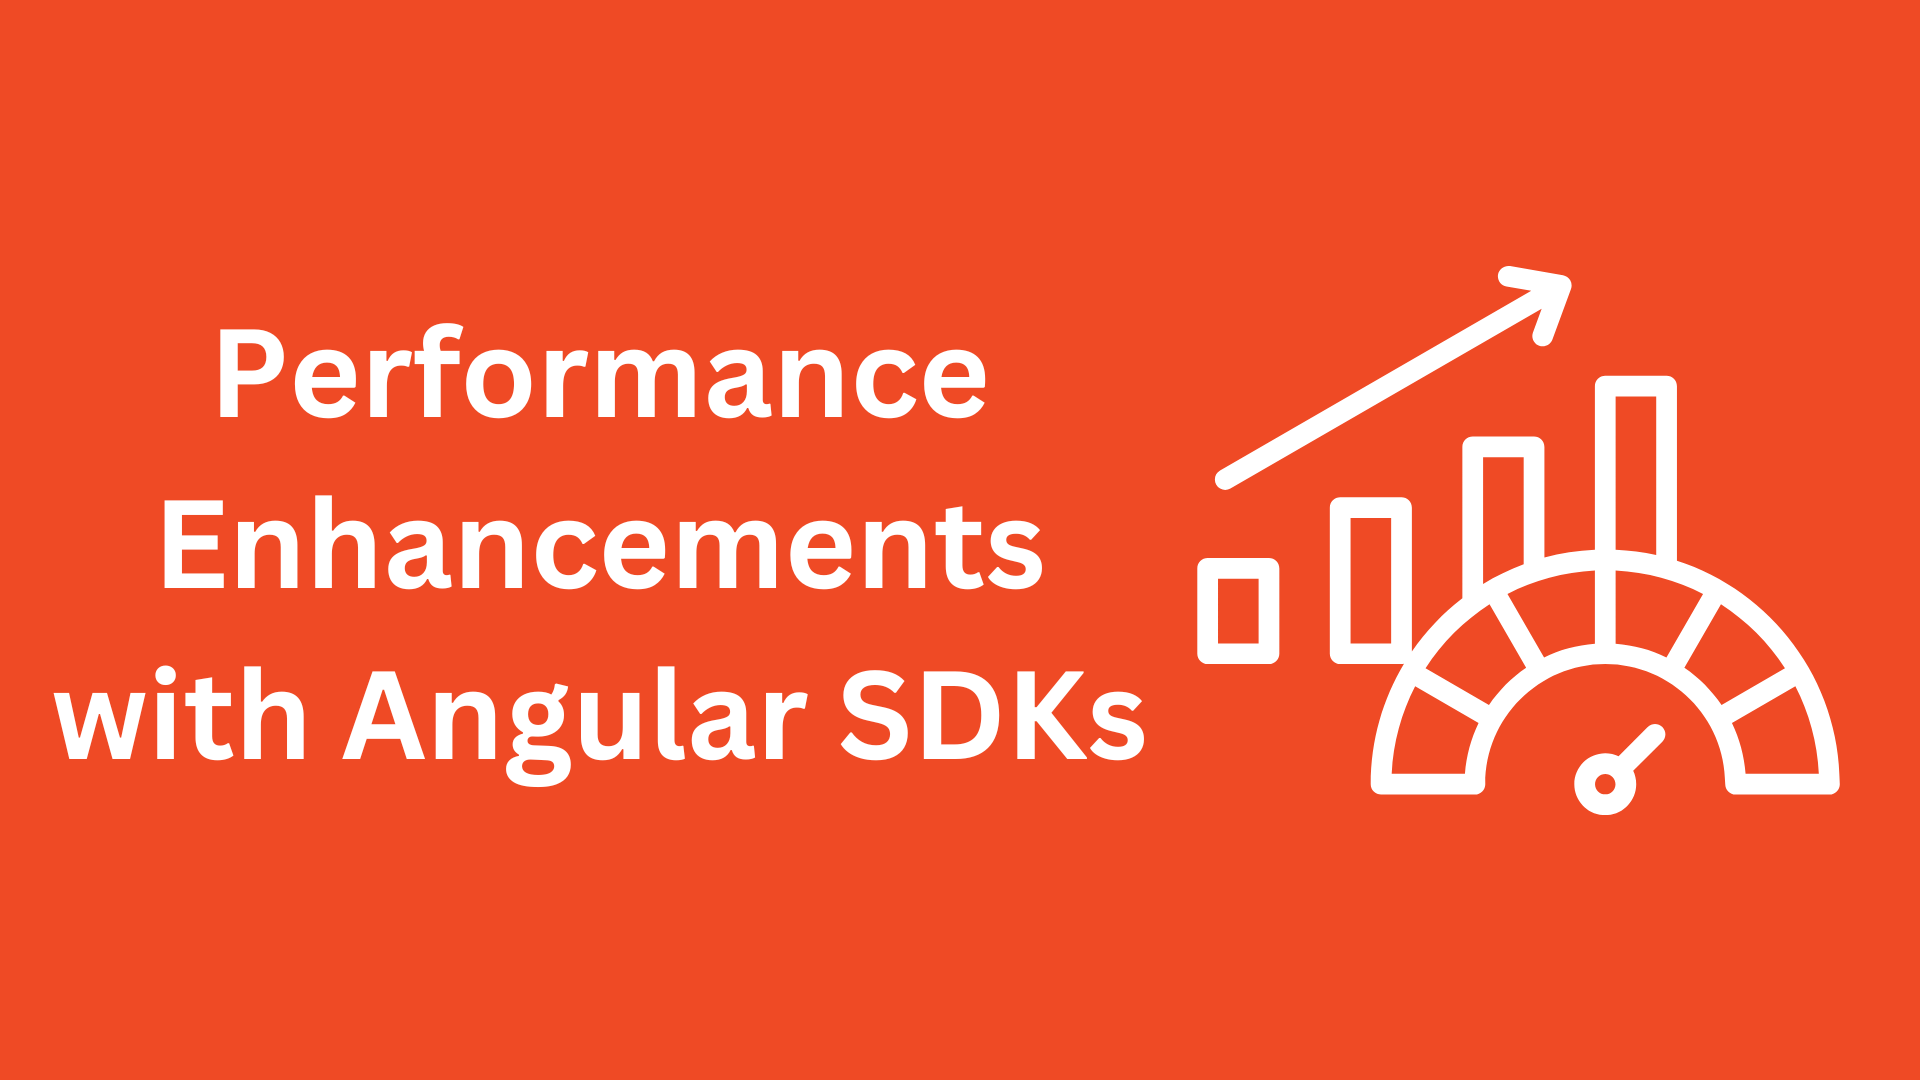 Bold red banner with white text stating 'Performance Enhancements with Angular SDKs' alongside a white speedometer graphic, representing speed and efficiency in document upload UIs.